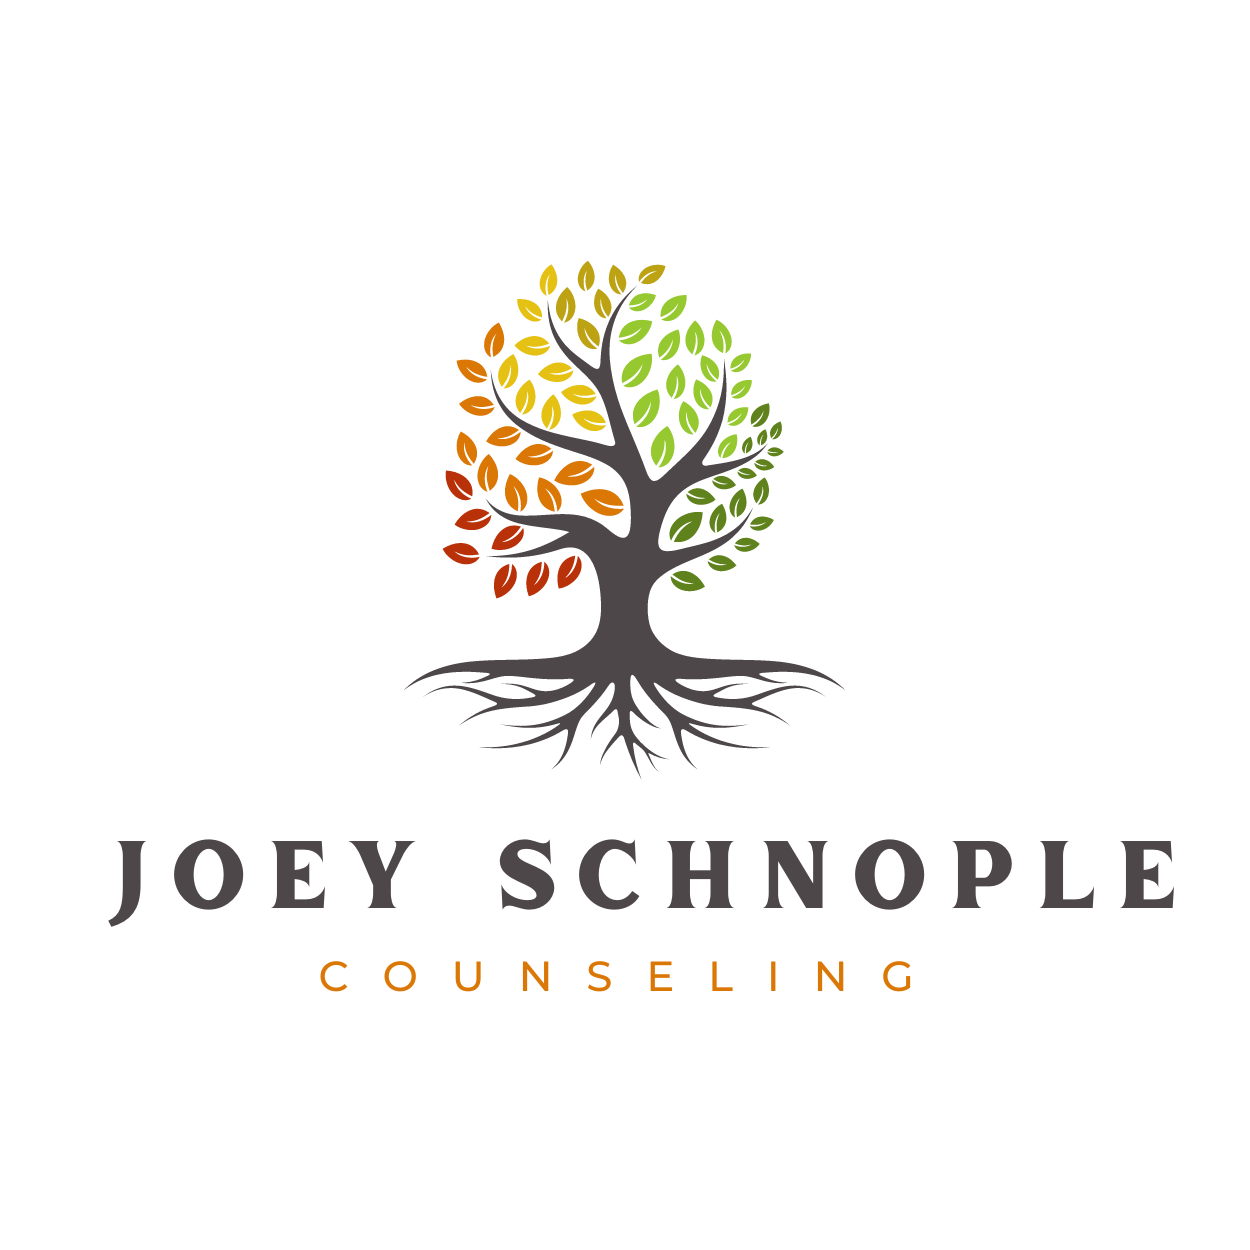 Joey Schnople Counseling